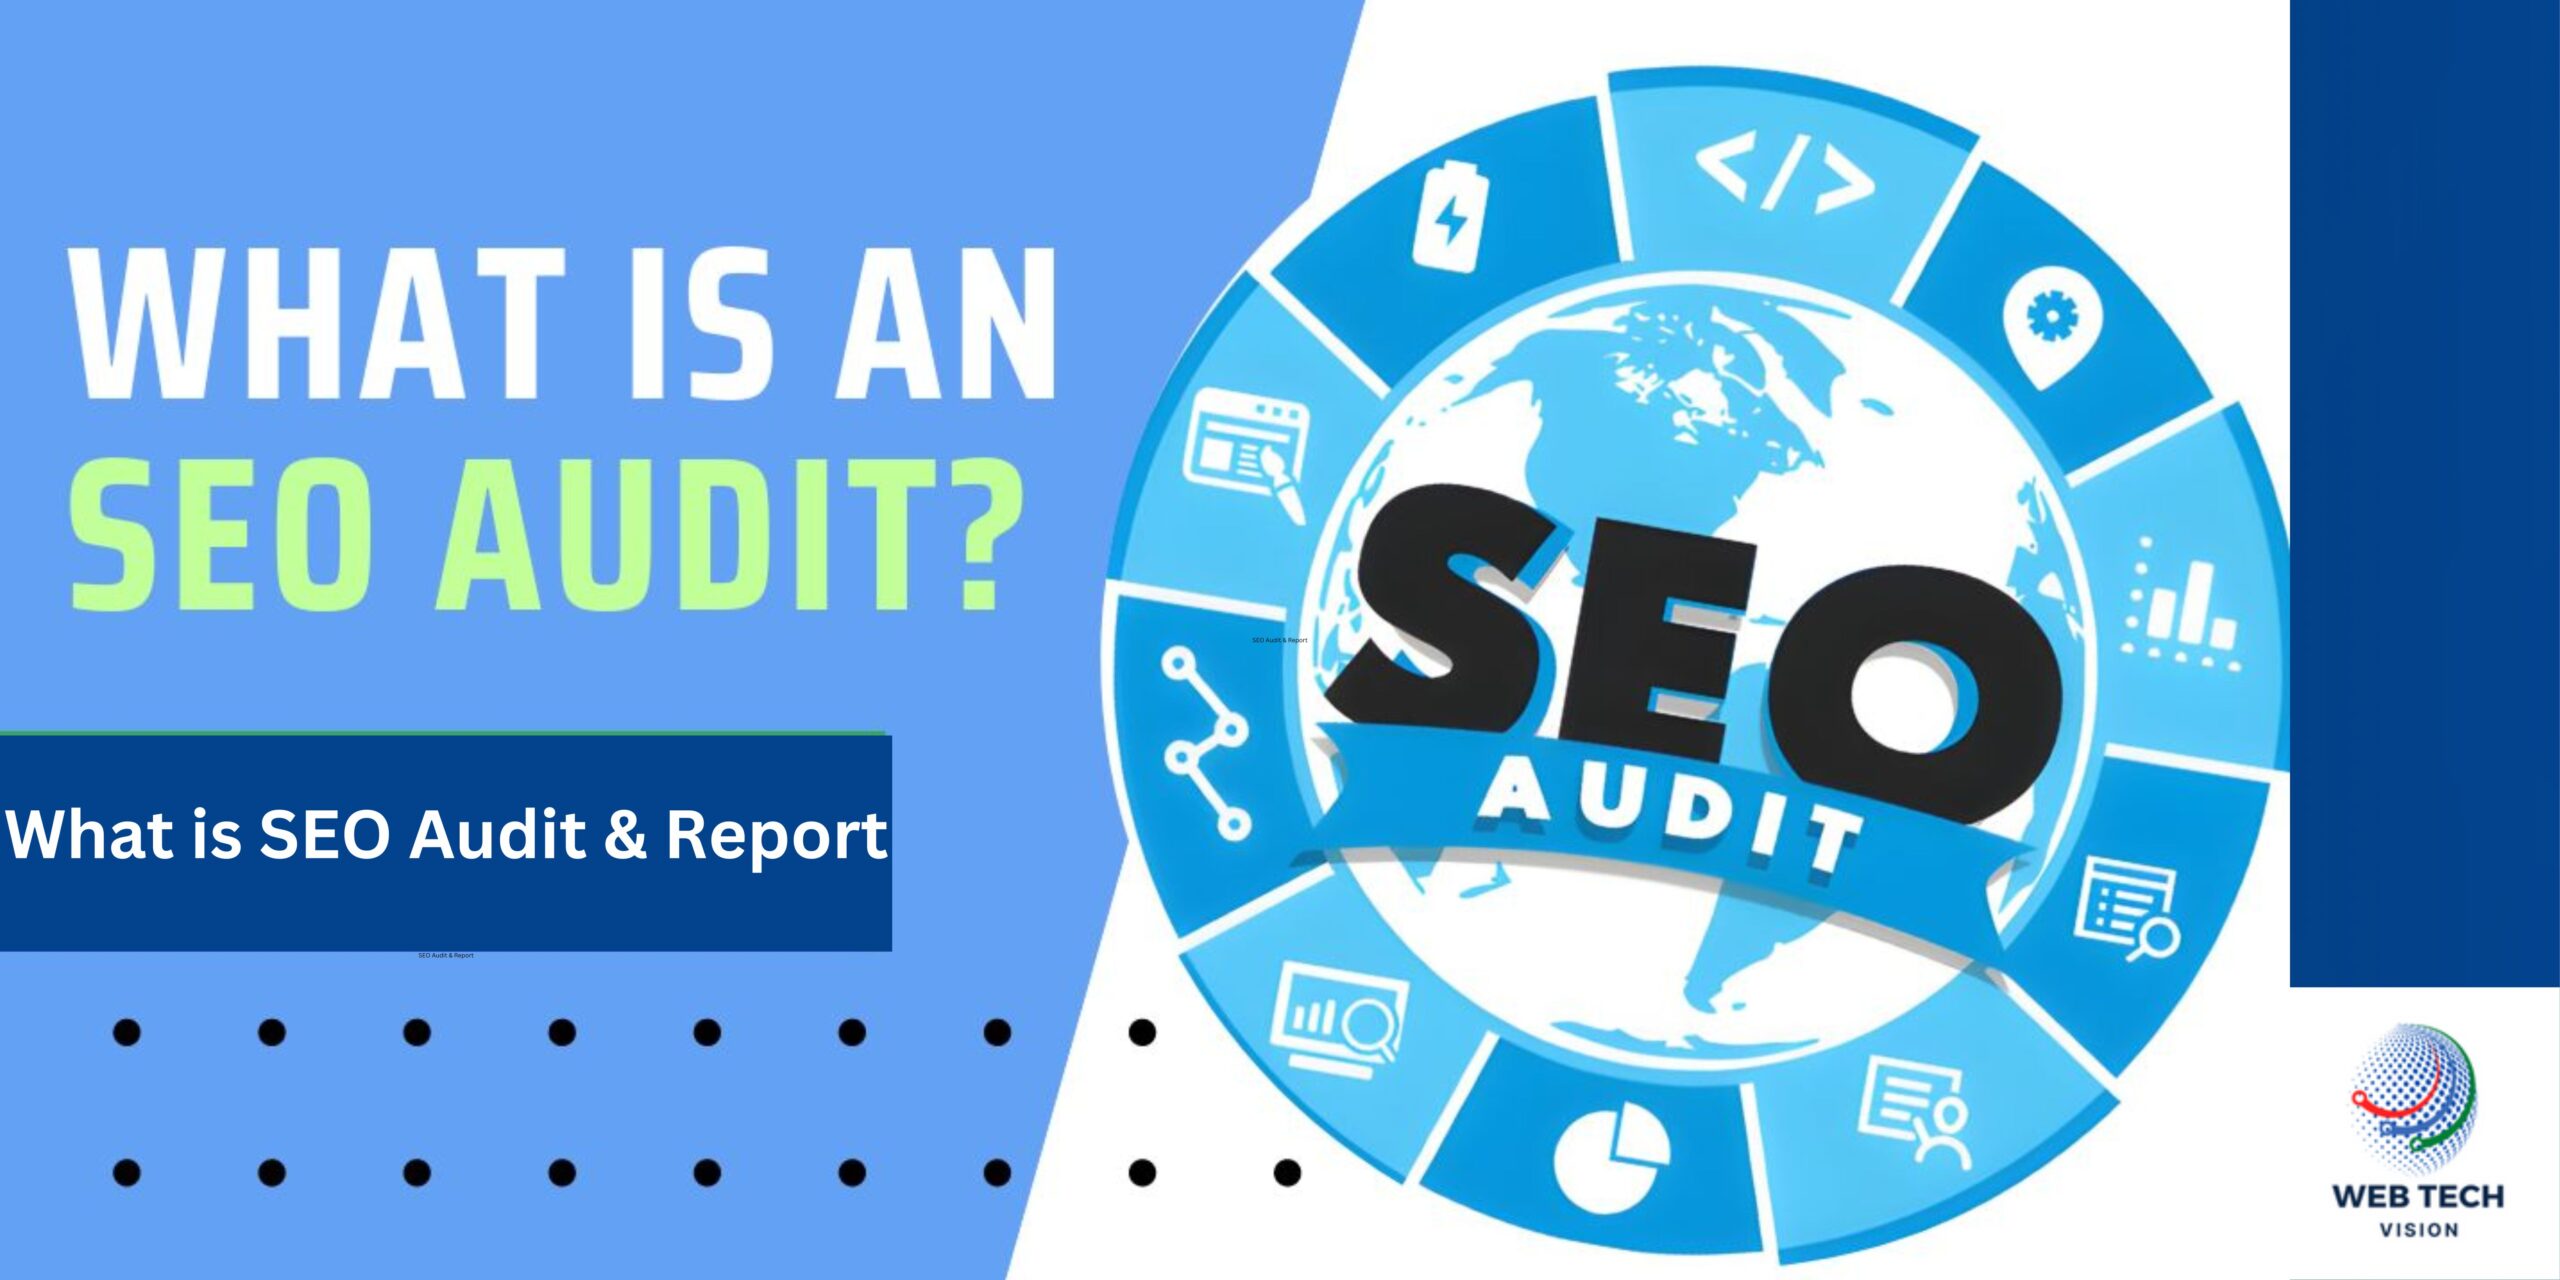 What is SEO Audit & Report